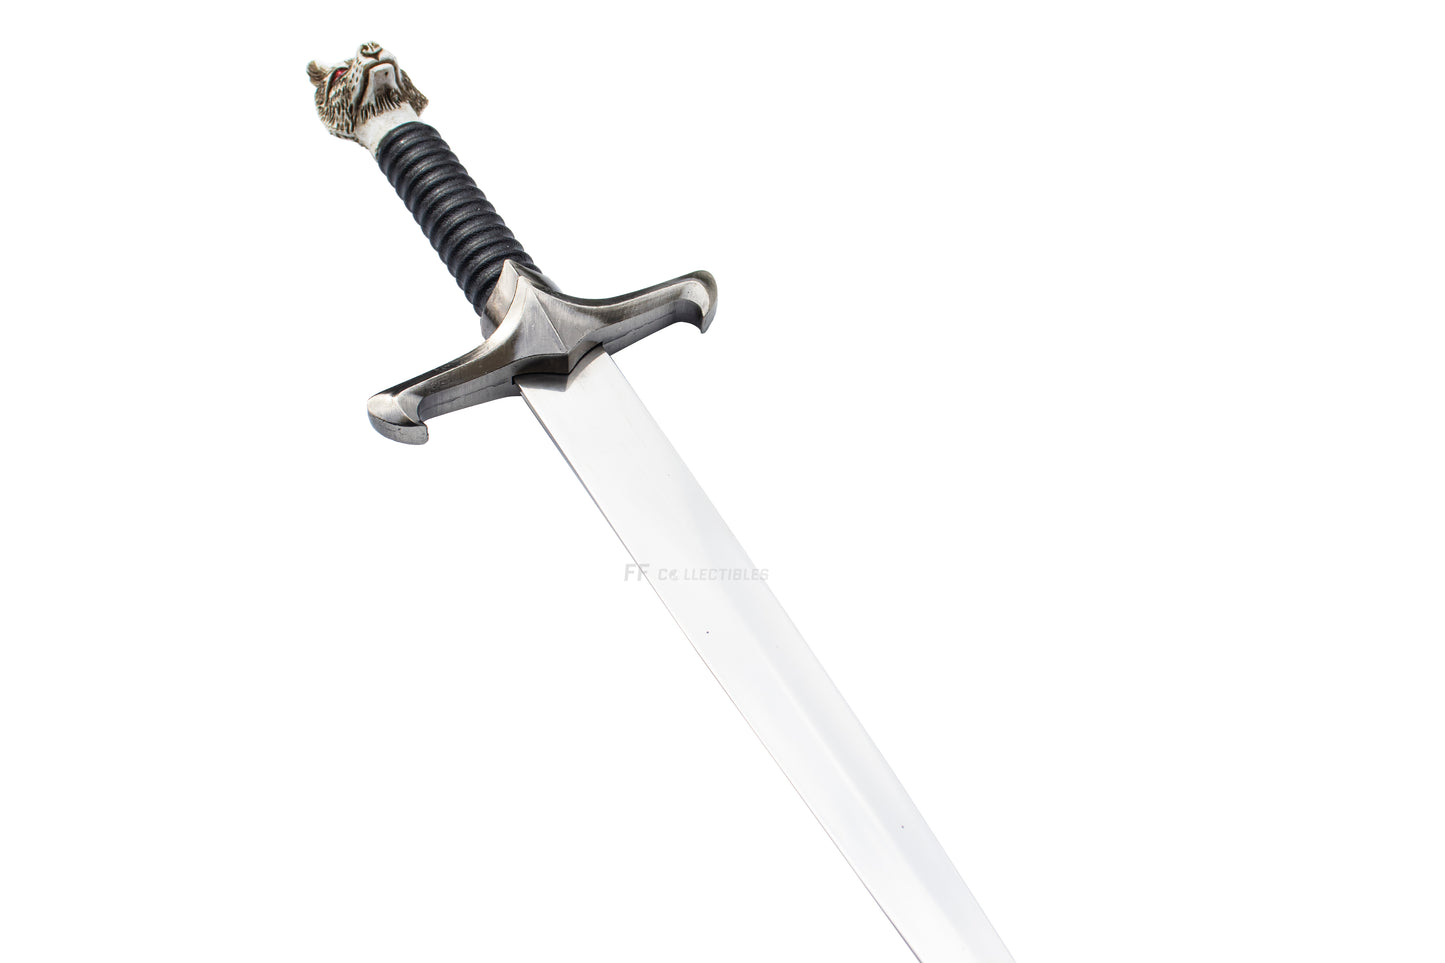 GAME OF THRONES - MINI LONGCLAW (BOOK VER), THE SWORD OF JON SNOW (w FREE stand)